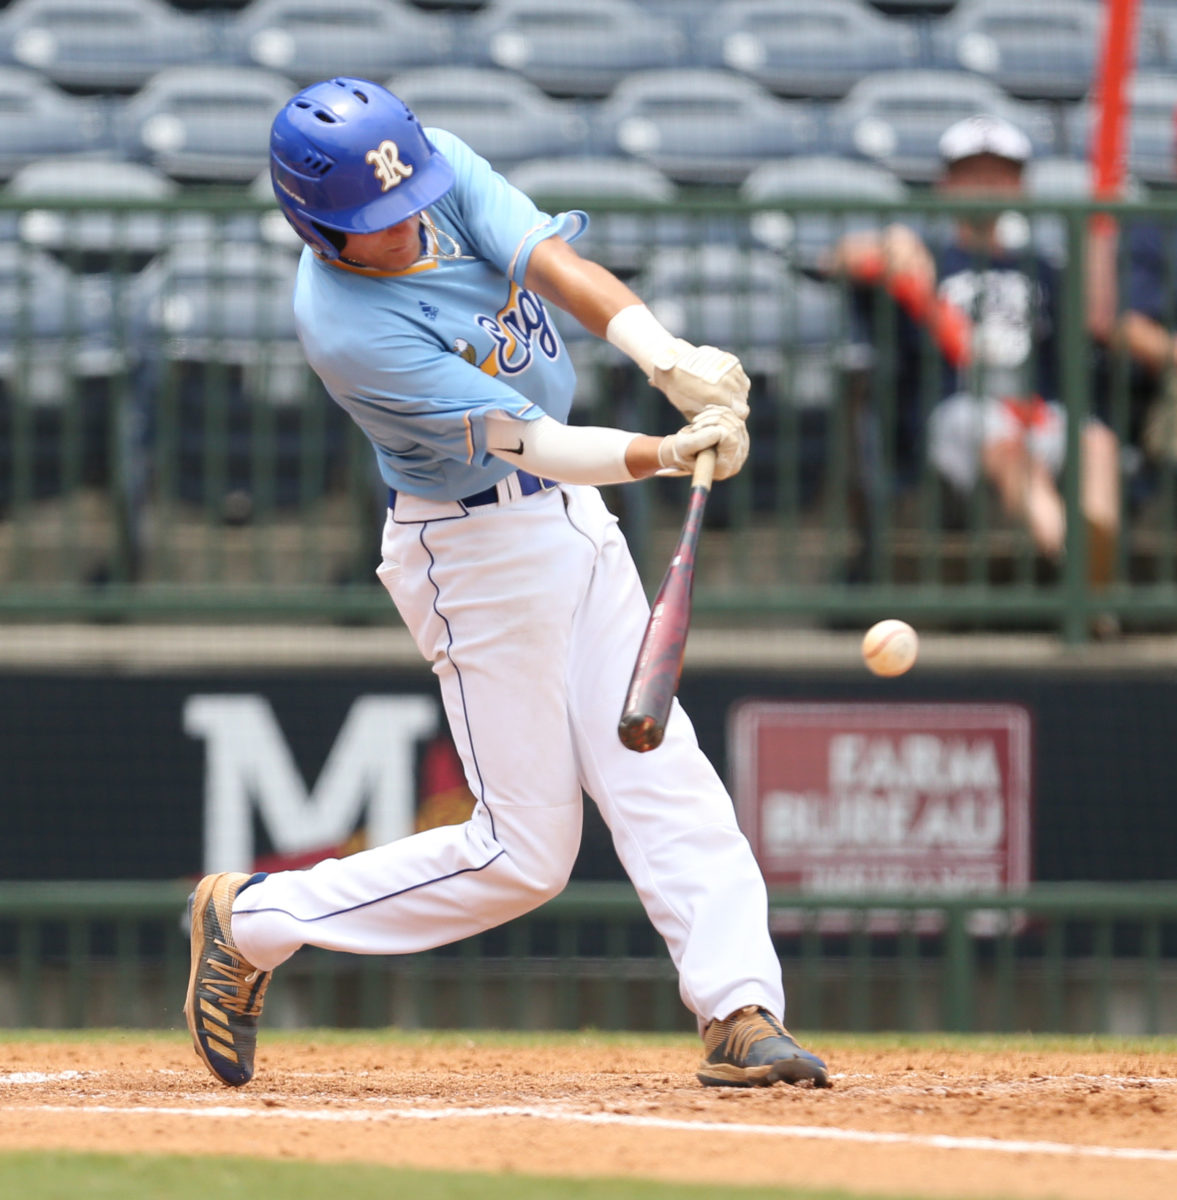 Resurrection's Miller Kay (4) makes contact with the ball. Tupelo Christian and Resurrection played in game 1 of the MHSAA Class 1A Baseball Championship on Tuesday, June 1, 2021 at Trustmark Park. Photo by Keith Warren